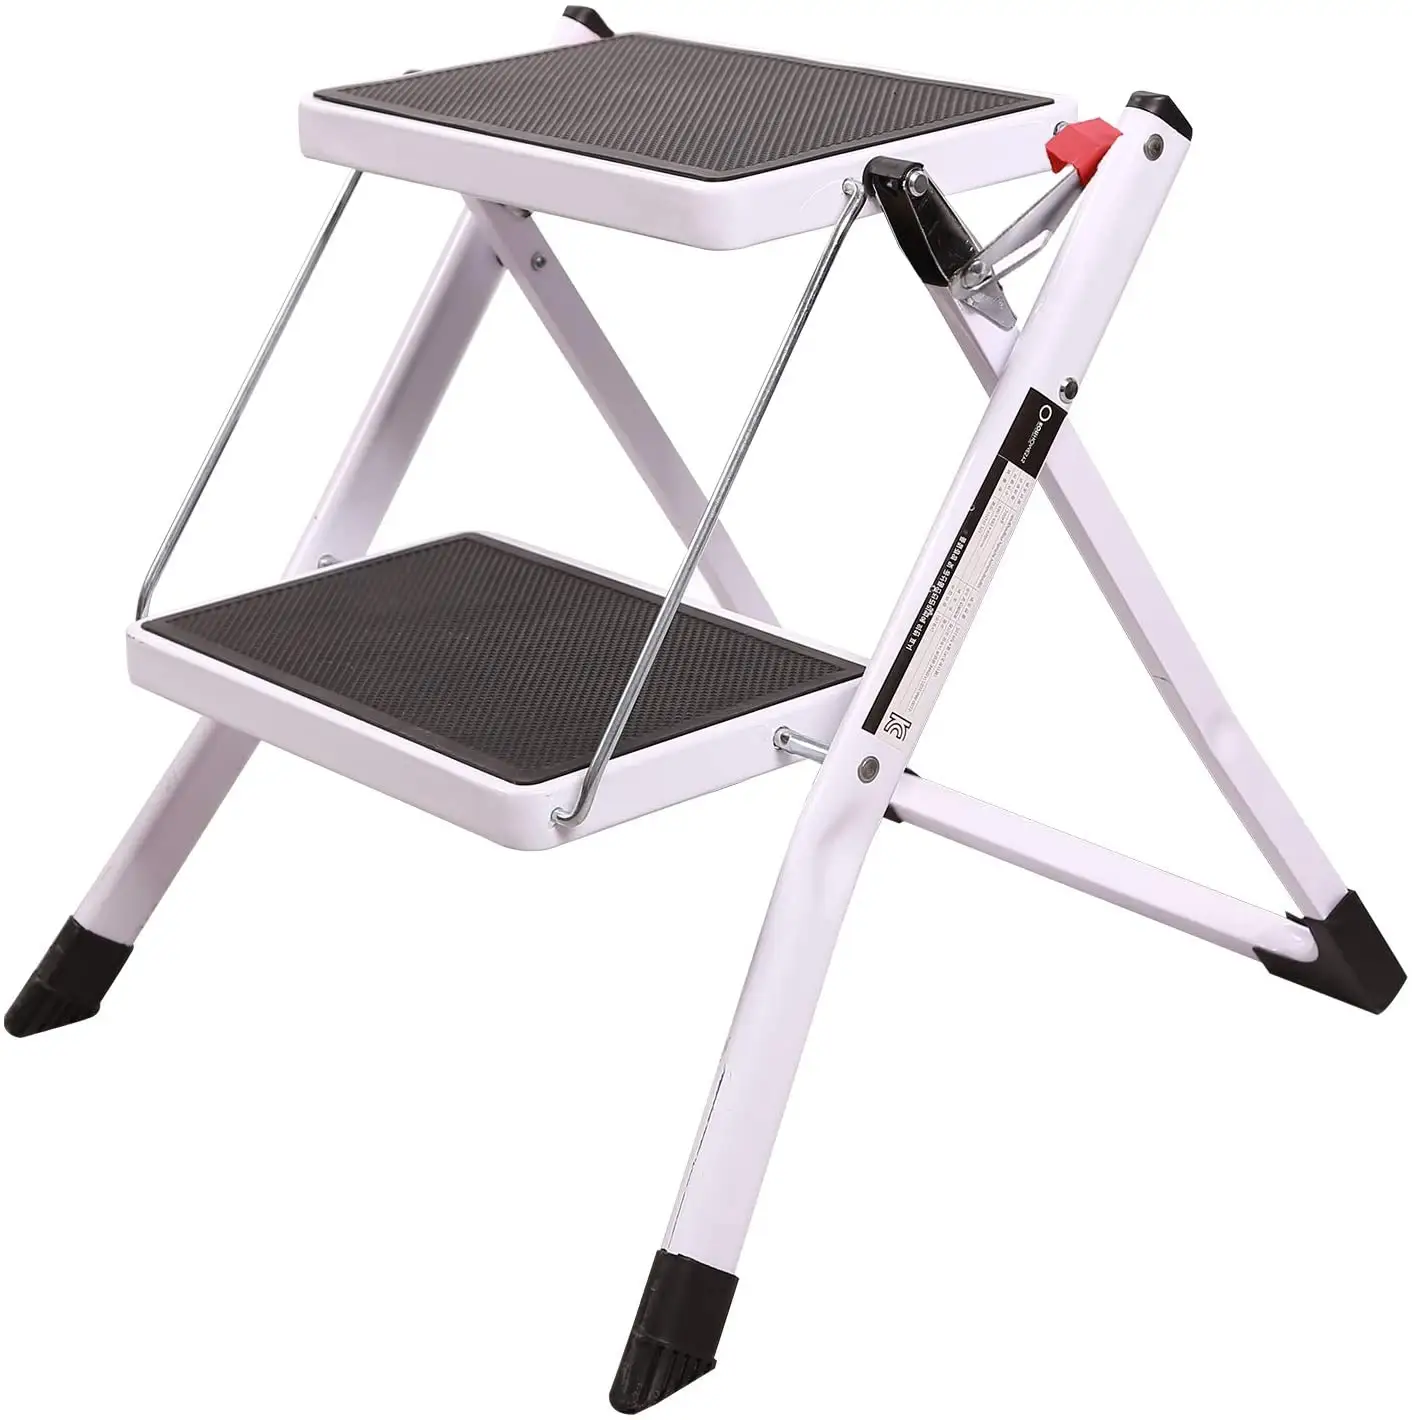 Small Step Ladder 2 Step Stool for Adults, Sturdy Heavy Duty Folding Mini Ladder for Kitchen